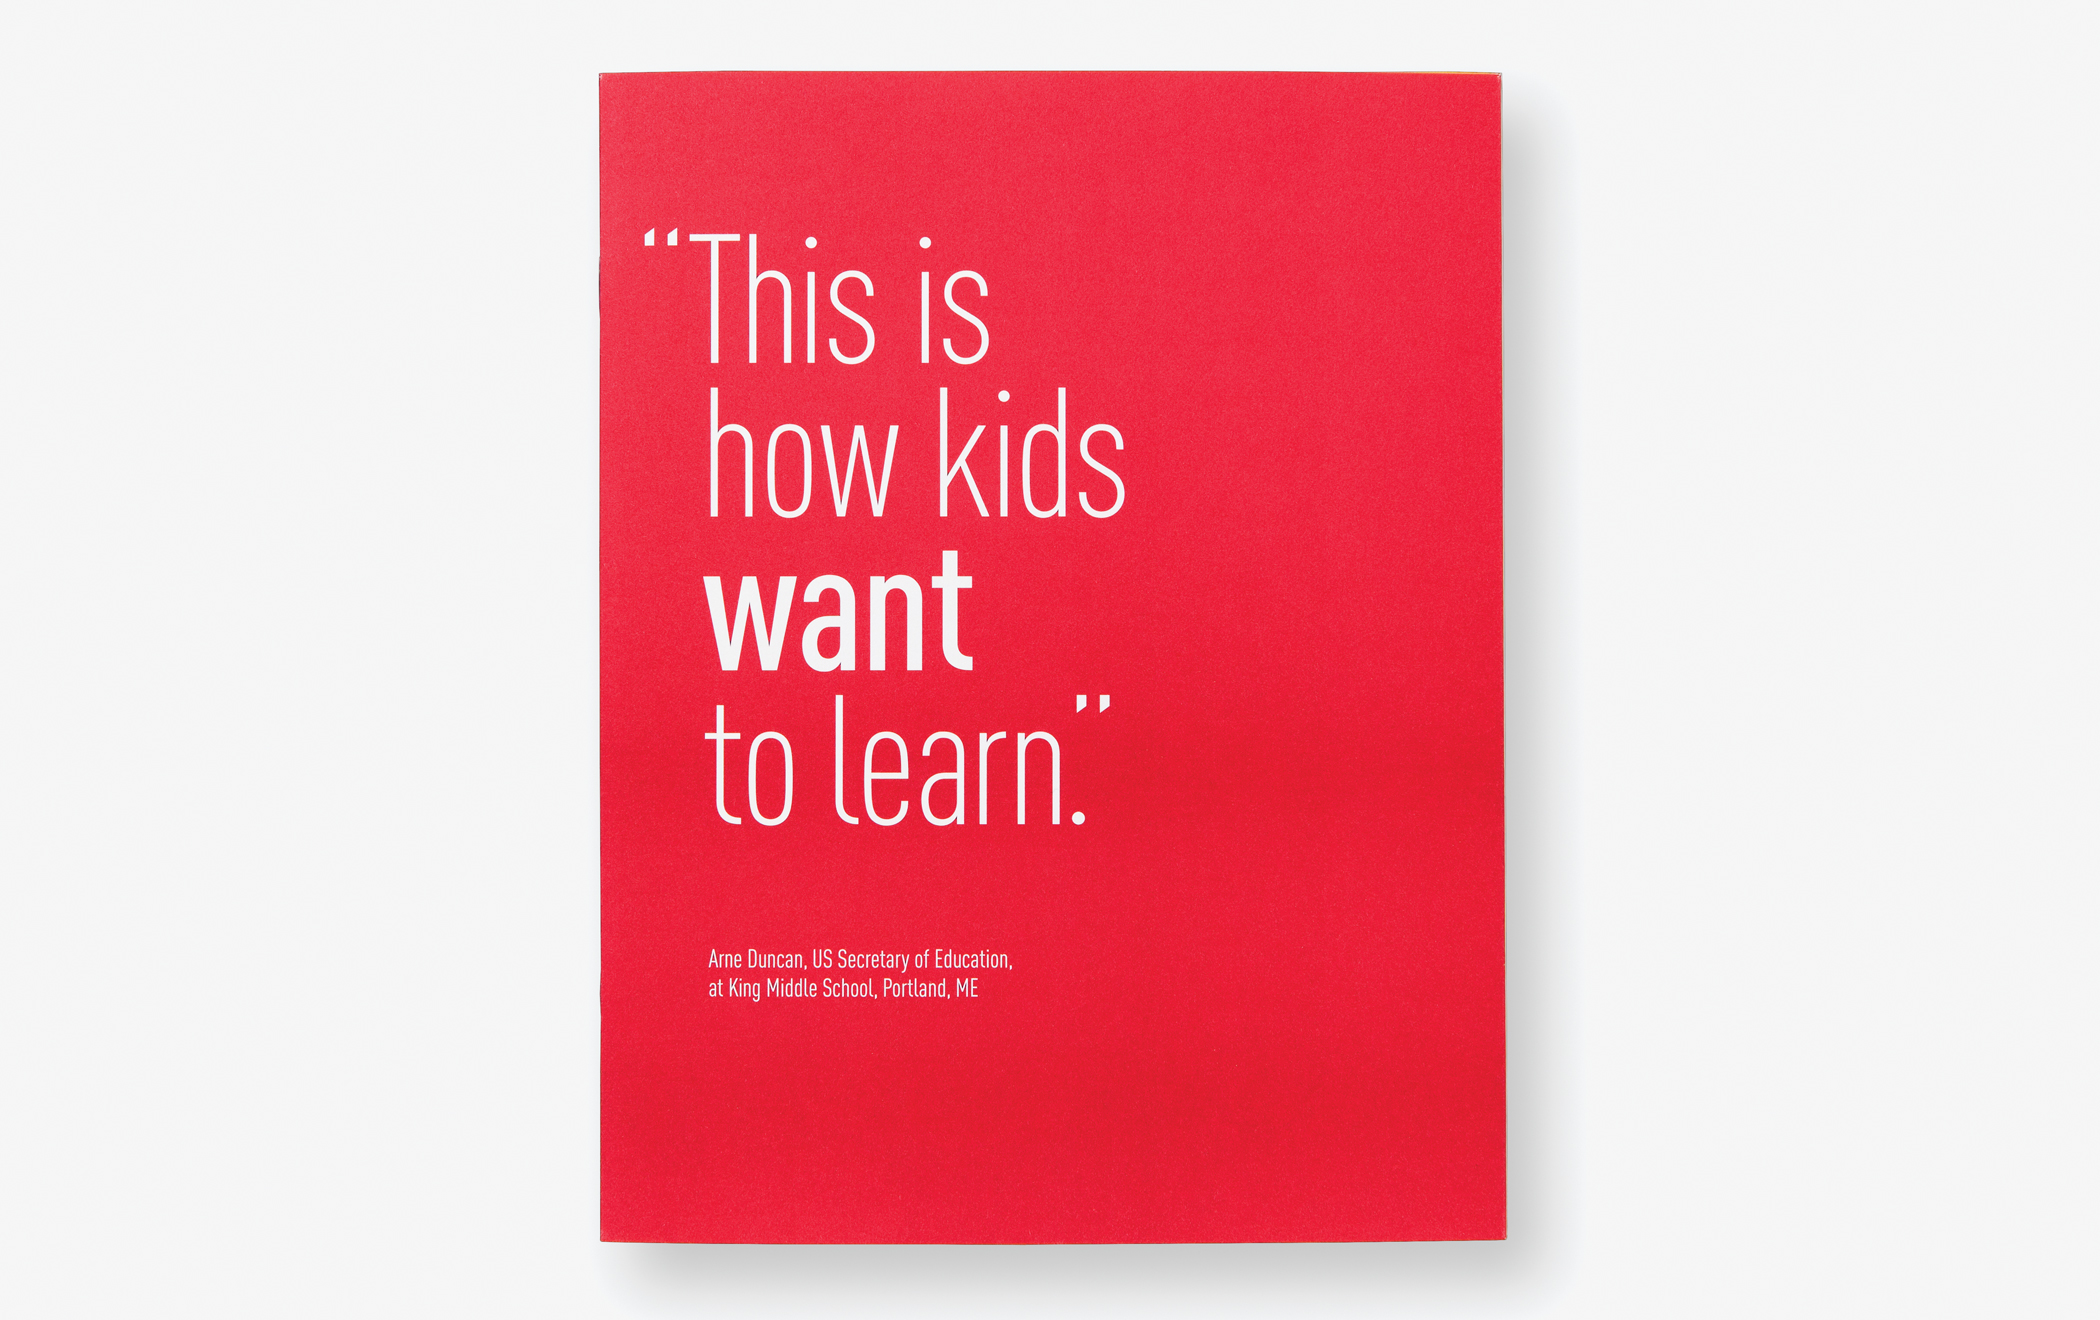 A bright crimson Expeditionary Learning report cover, with the headline "This is how kids want to learn" in white text.